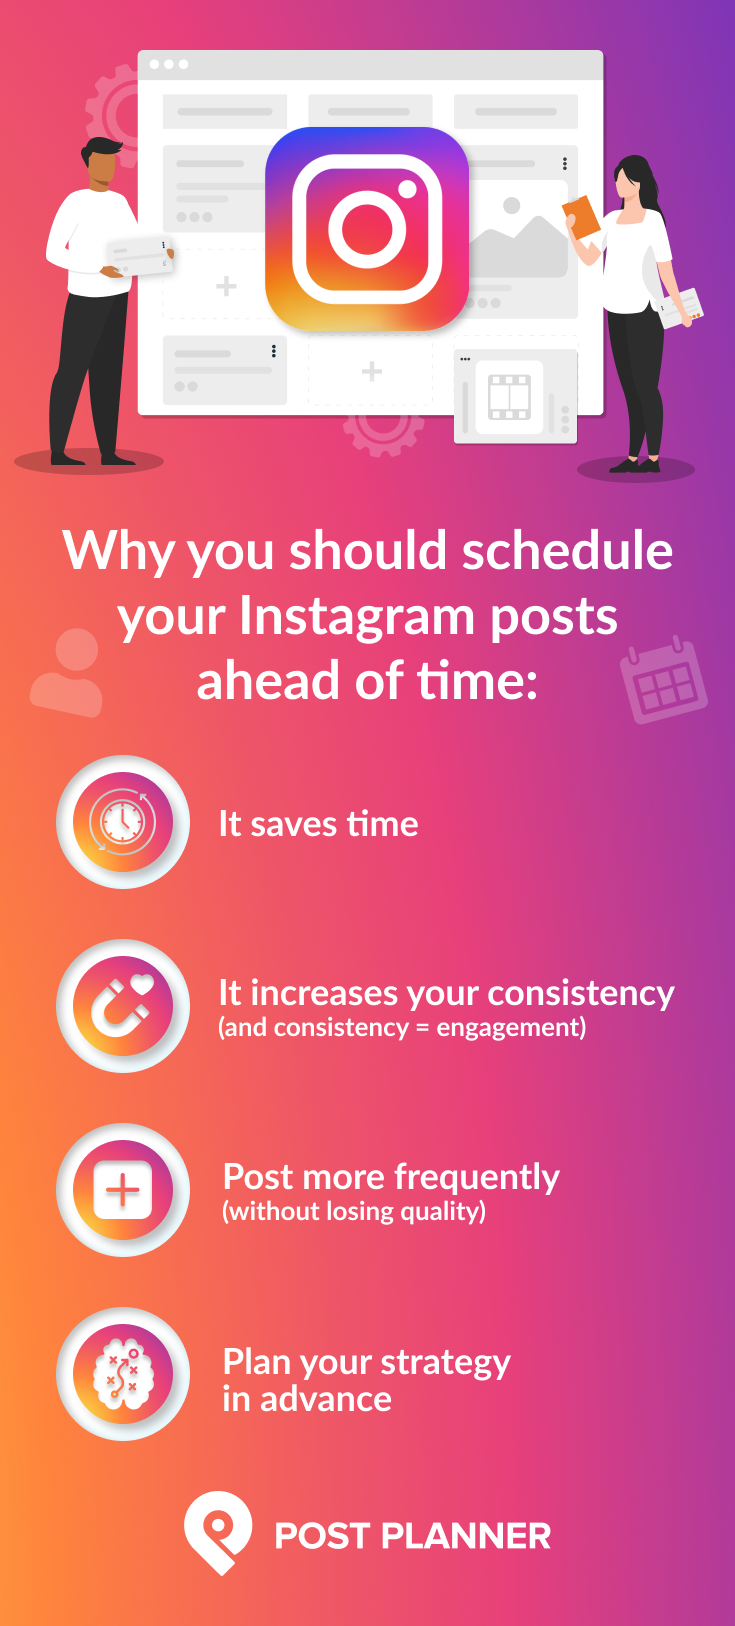 Why you should schedule your Instagram posts ahead of time